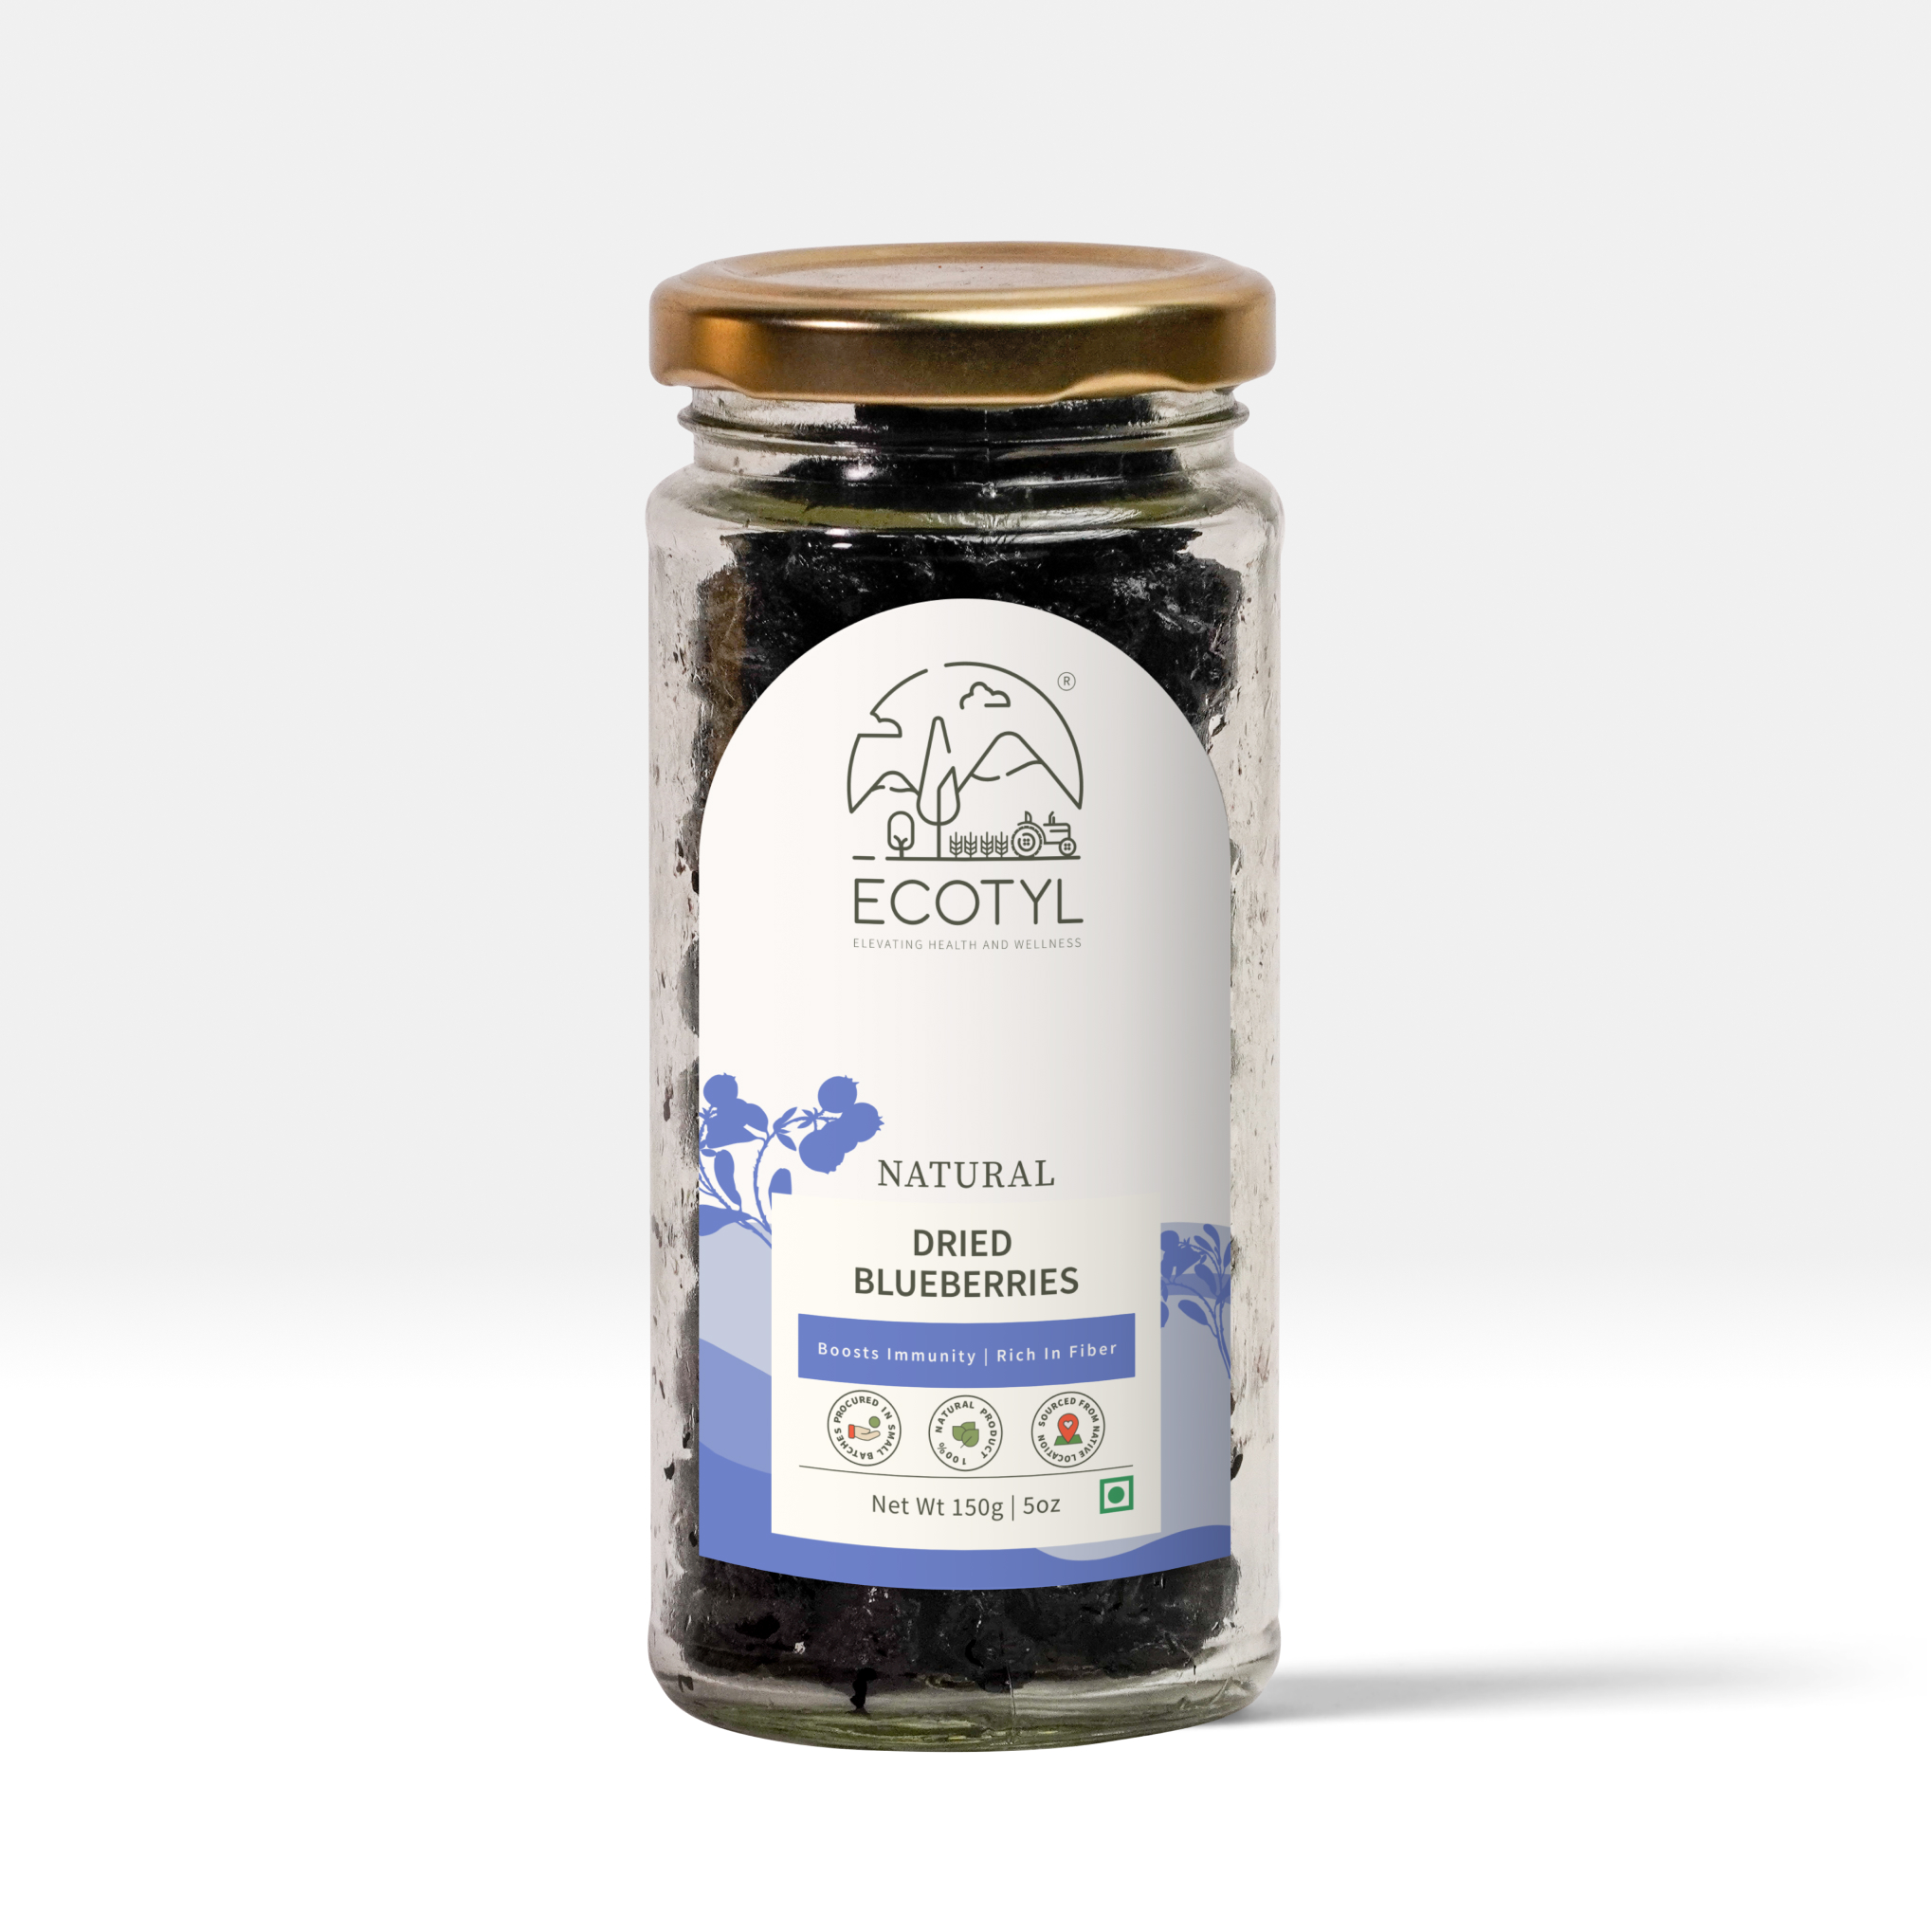 Buy Ecotyl Natural Dried Blueberries - 150g at Best Price Online